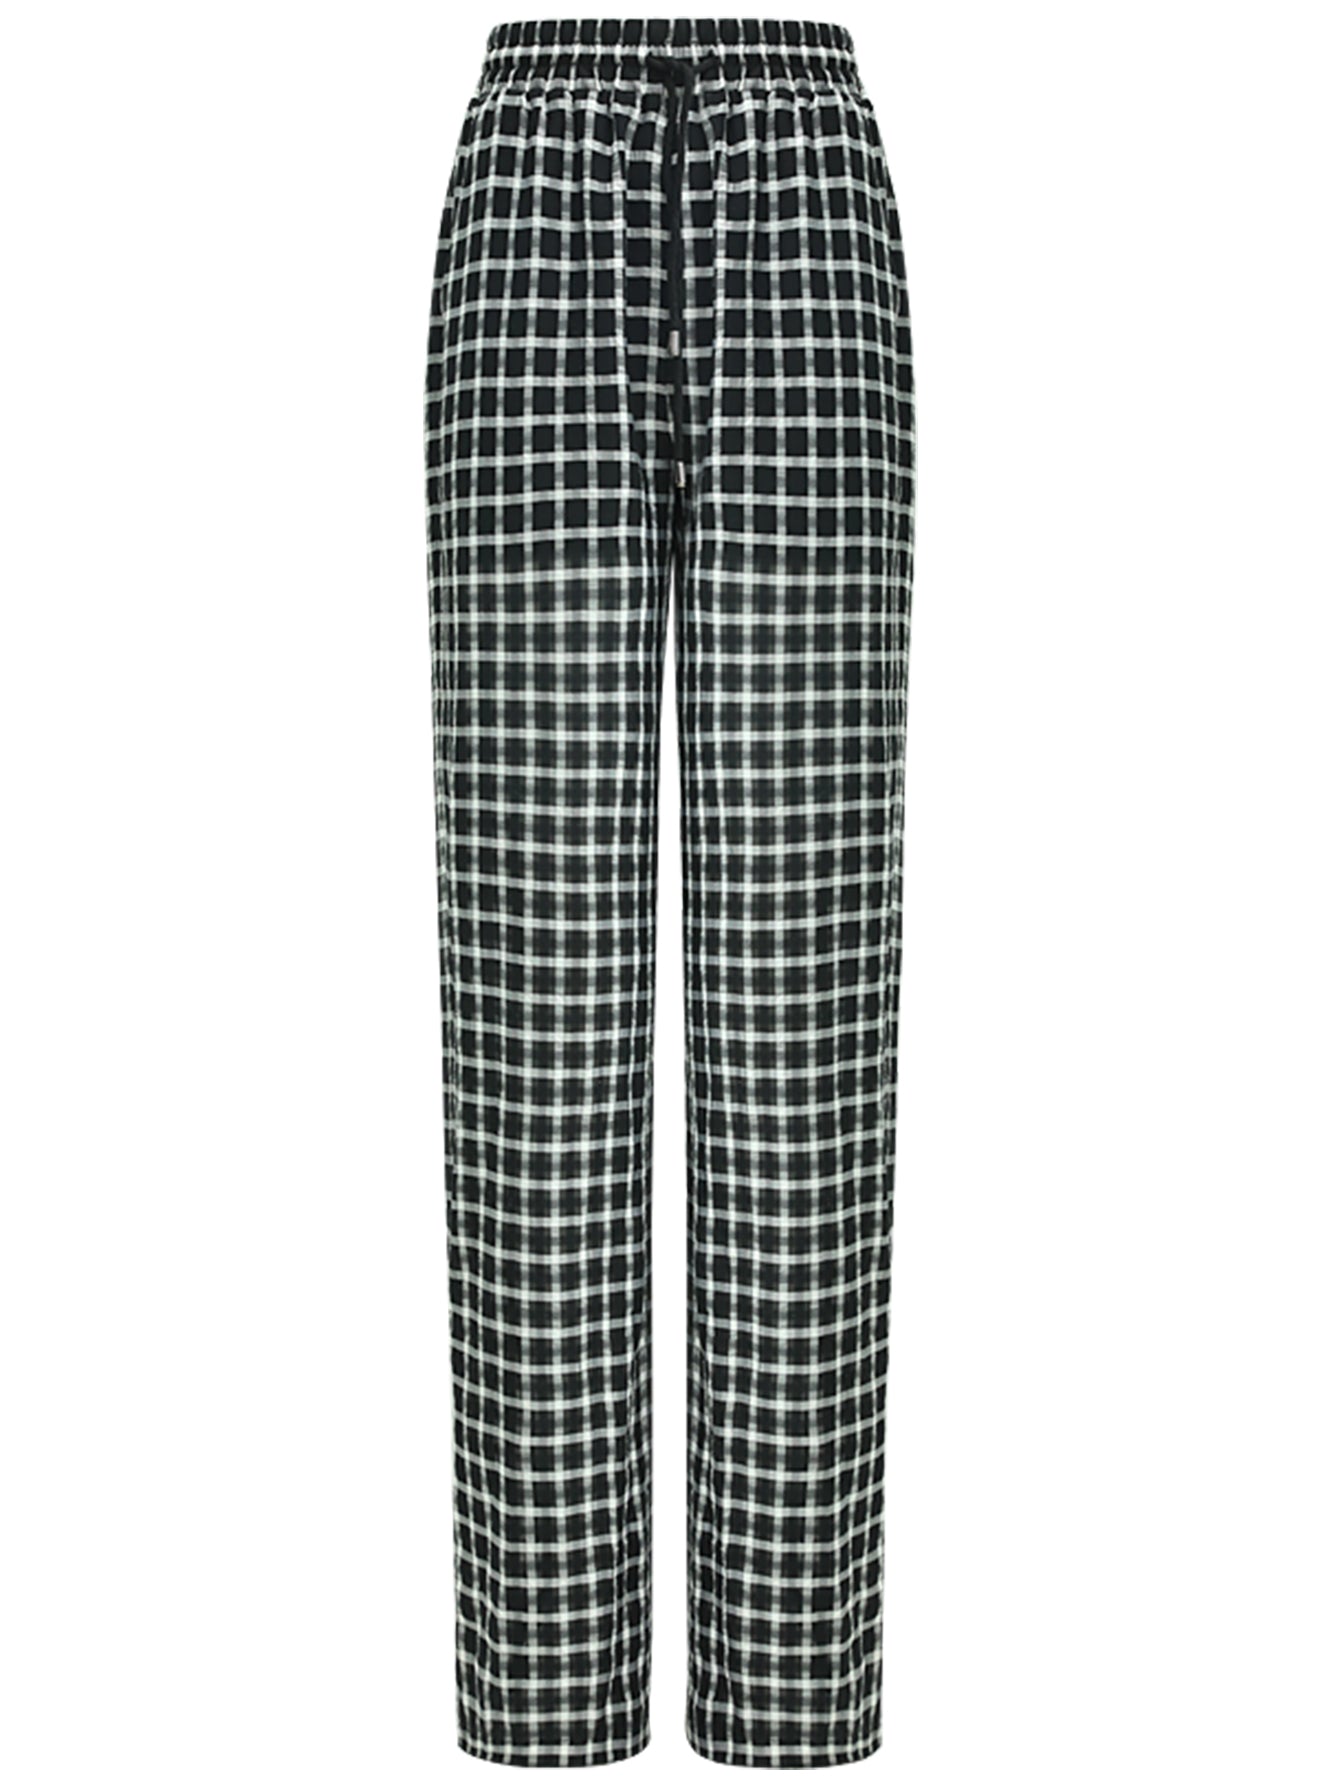 slouchy-relaxed-fit-casual-checkered-pants_all_check_4.jpg